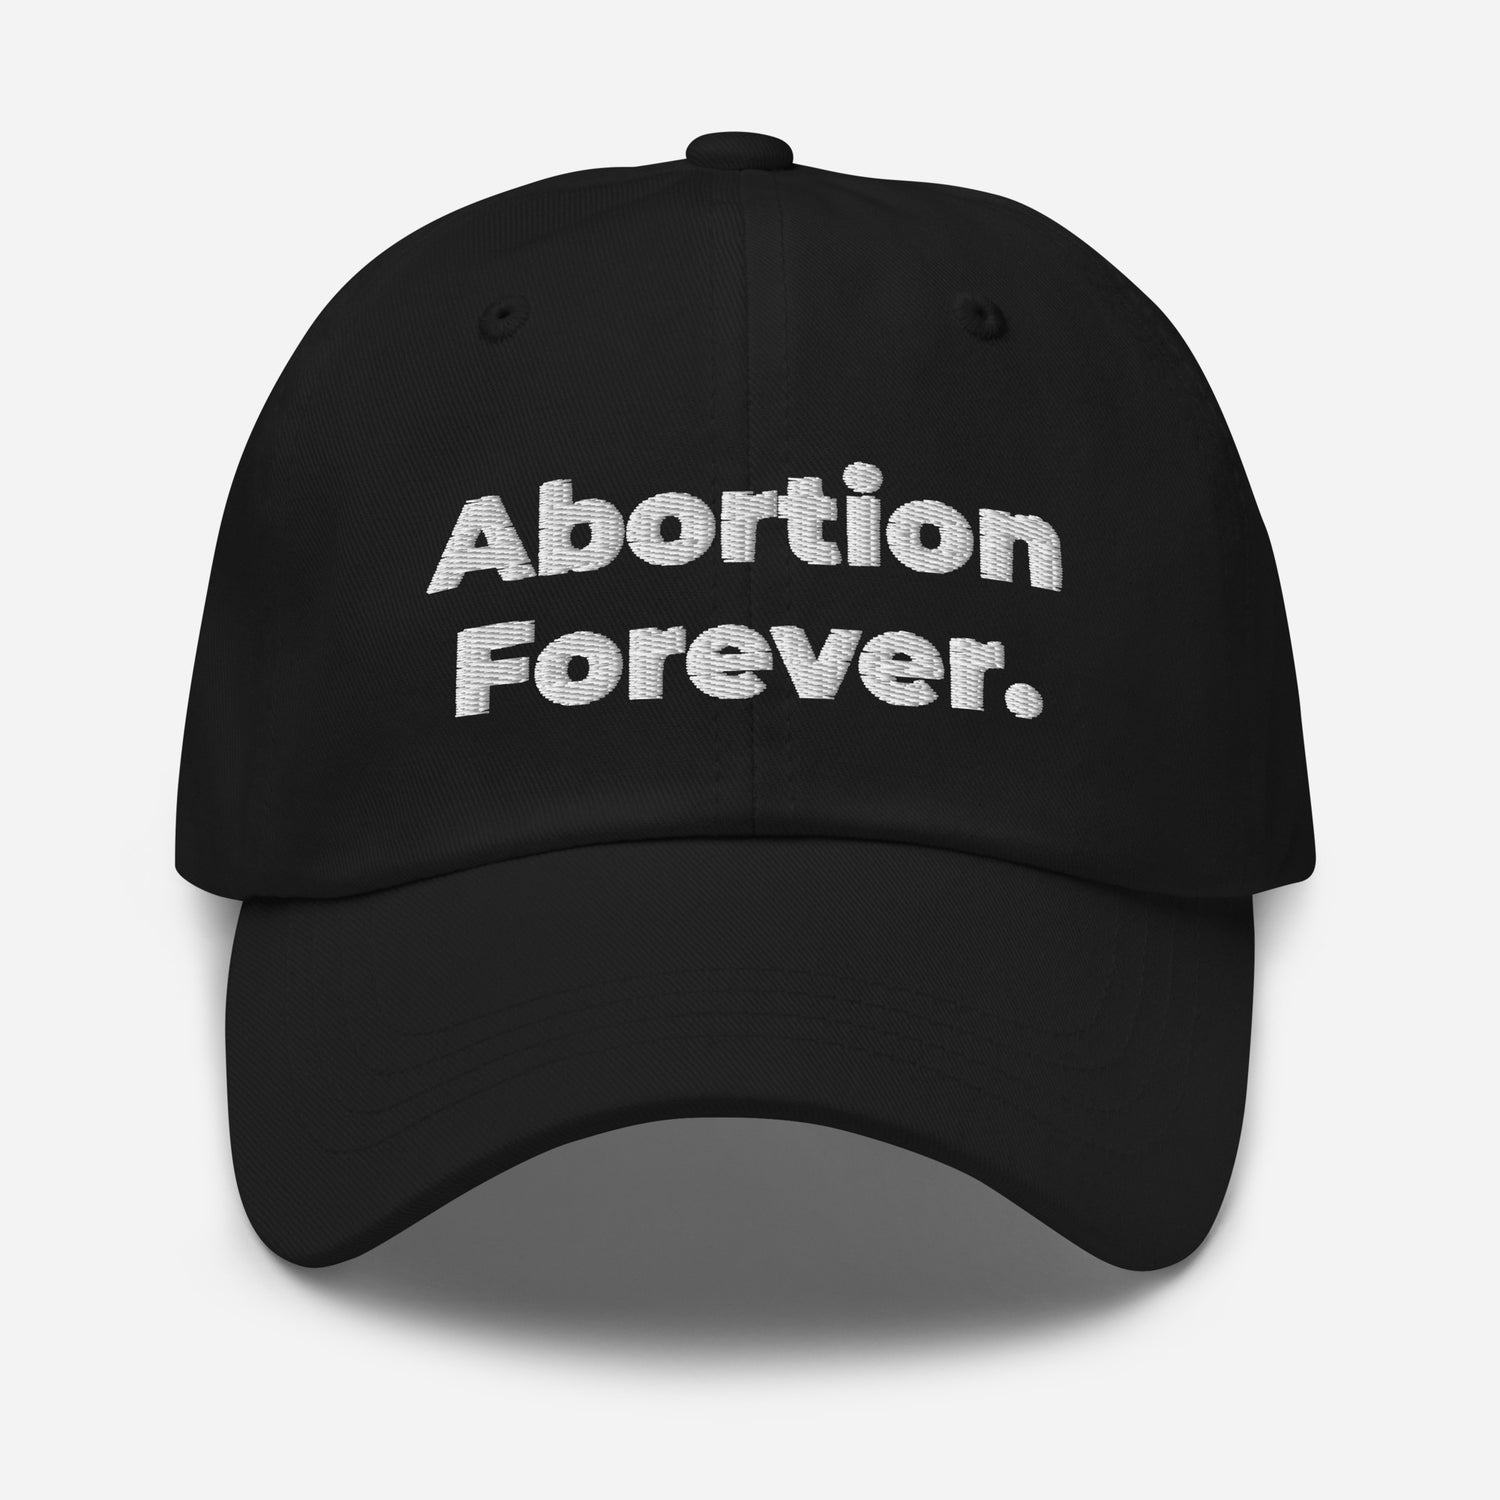 Abortion Forever